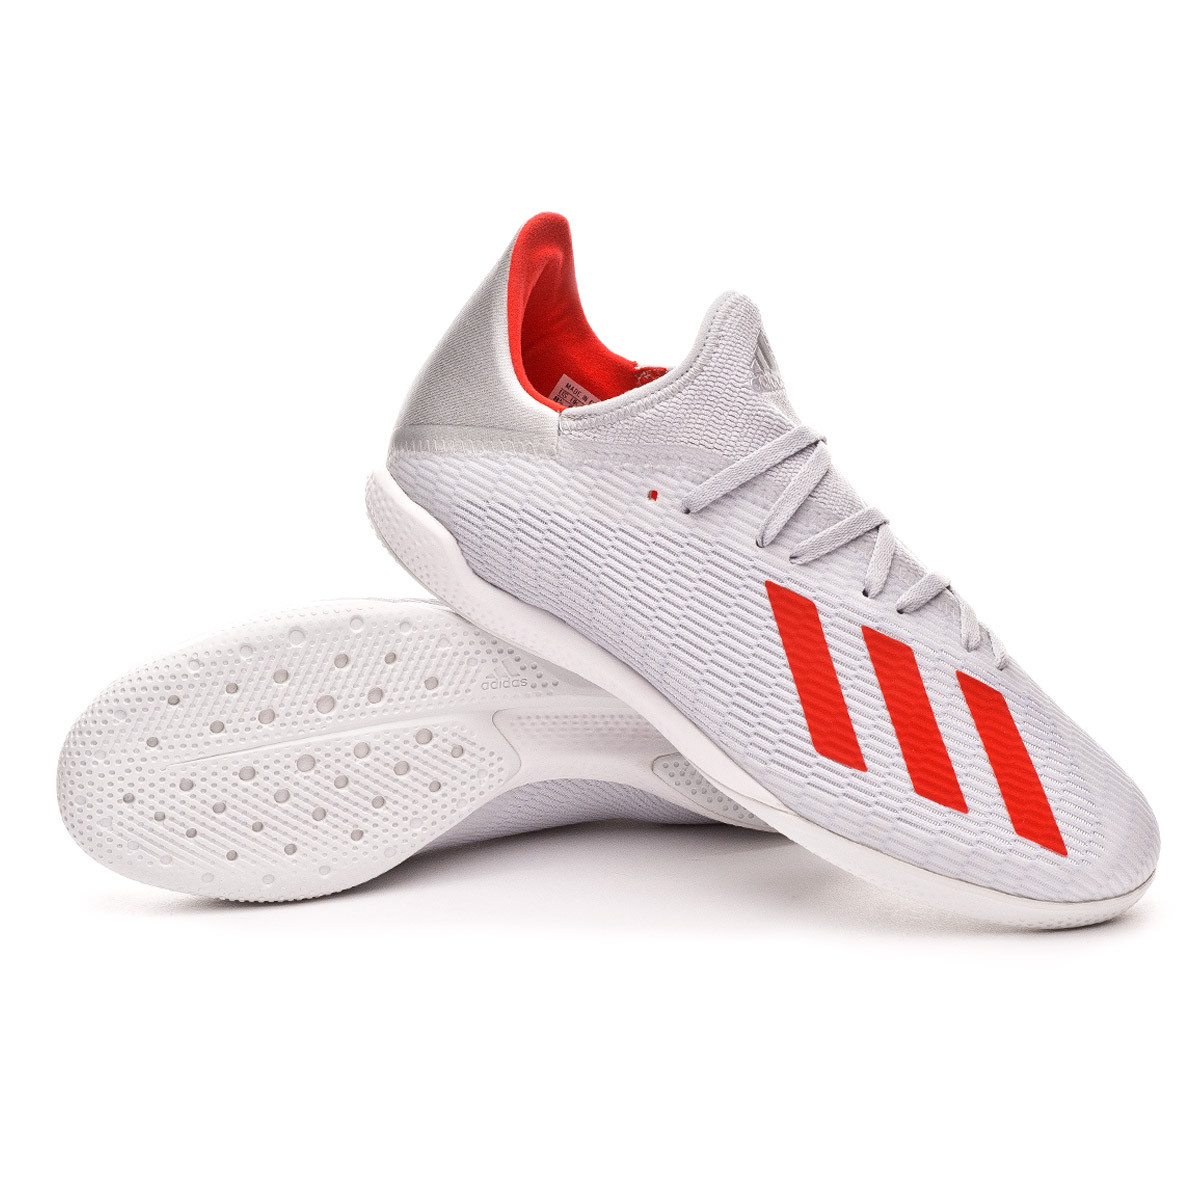 adidas x 19.3 indoor soccer shoes